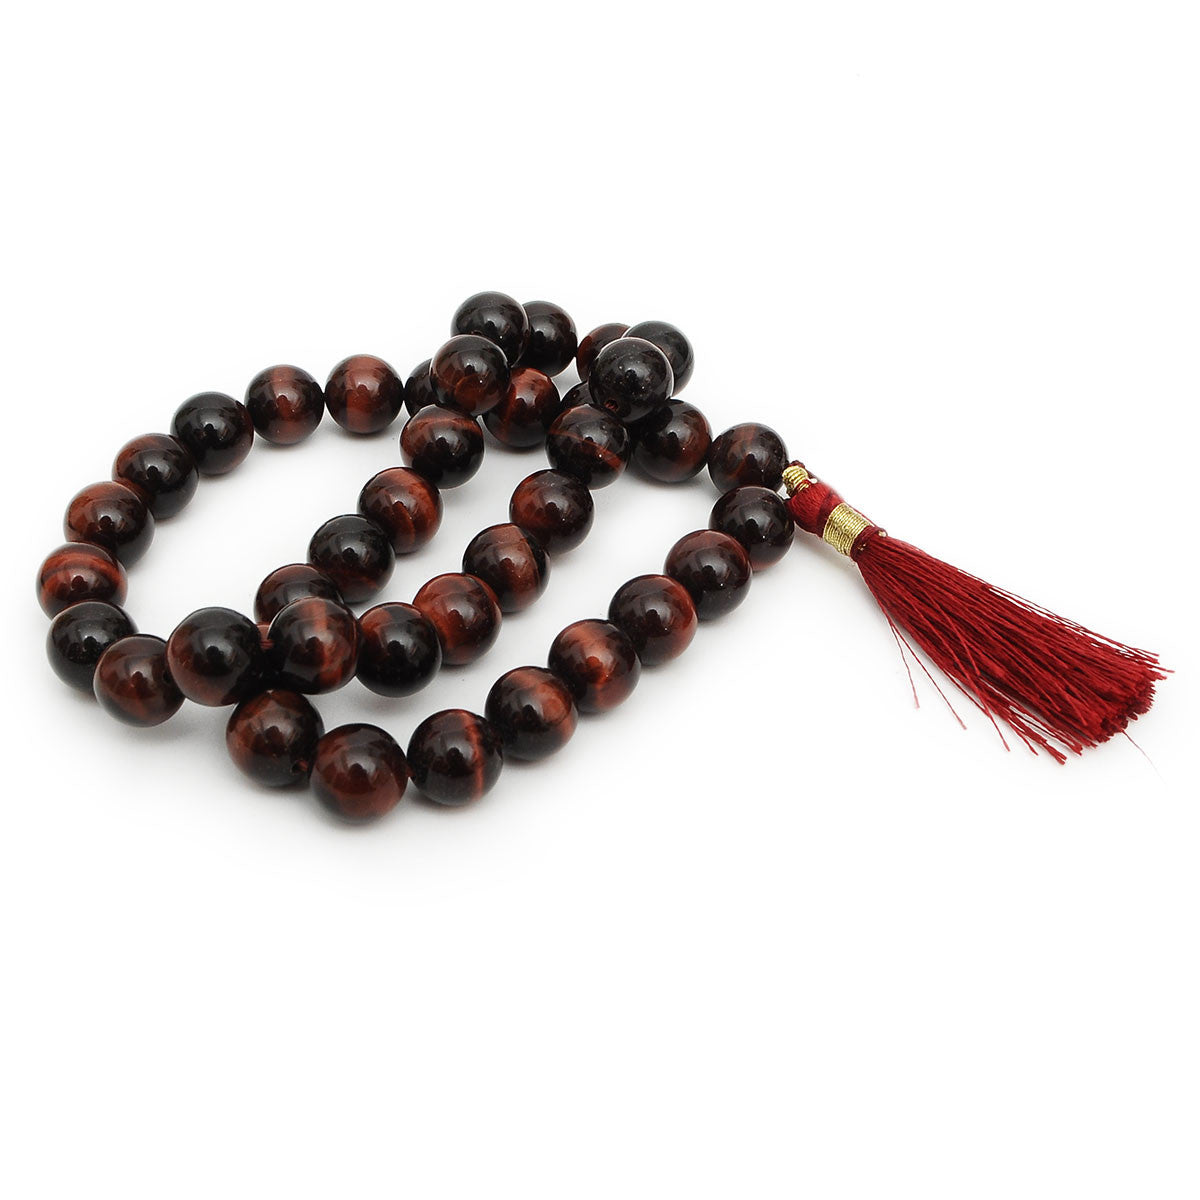 Mala Beads 10mm Natural Gemstones Round Beads Necklace 16' inches Long Crystals